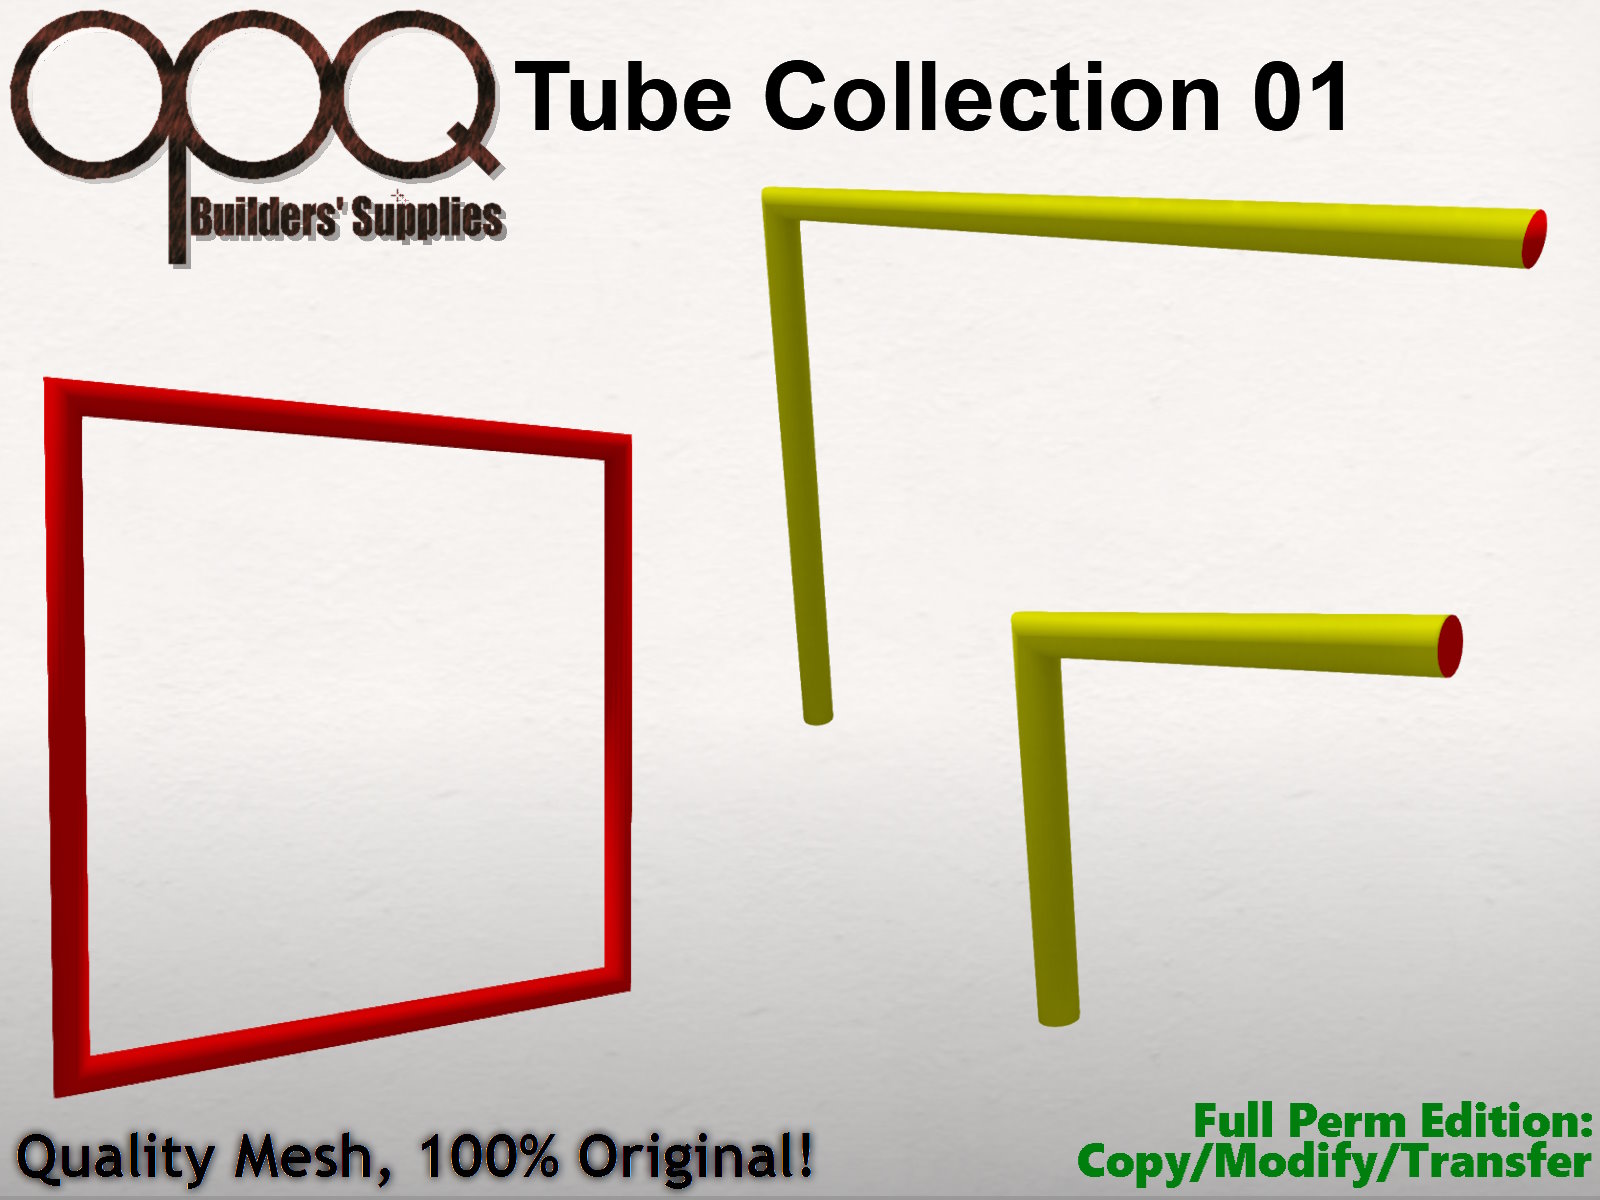 OPQ Tube Collection 01 Poster.jpg